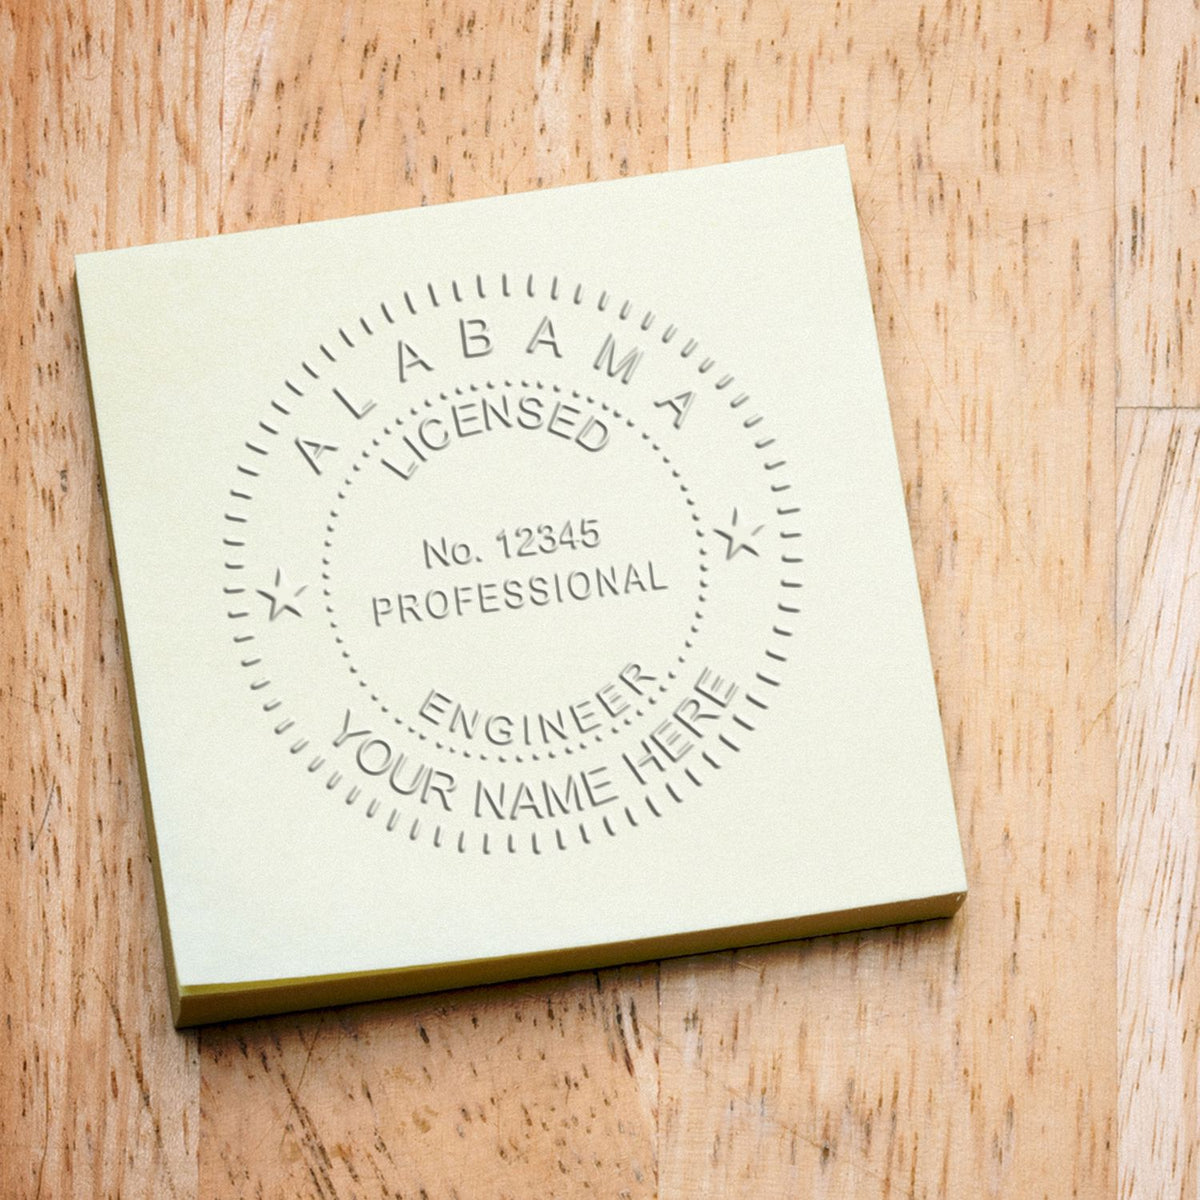 This paper is stamped with a sample imprint of the Soft Alabama Professional Engineer Seal, signifying its quality and reliability.